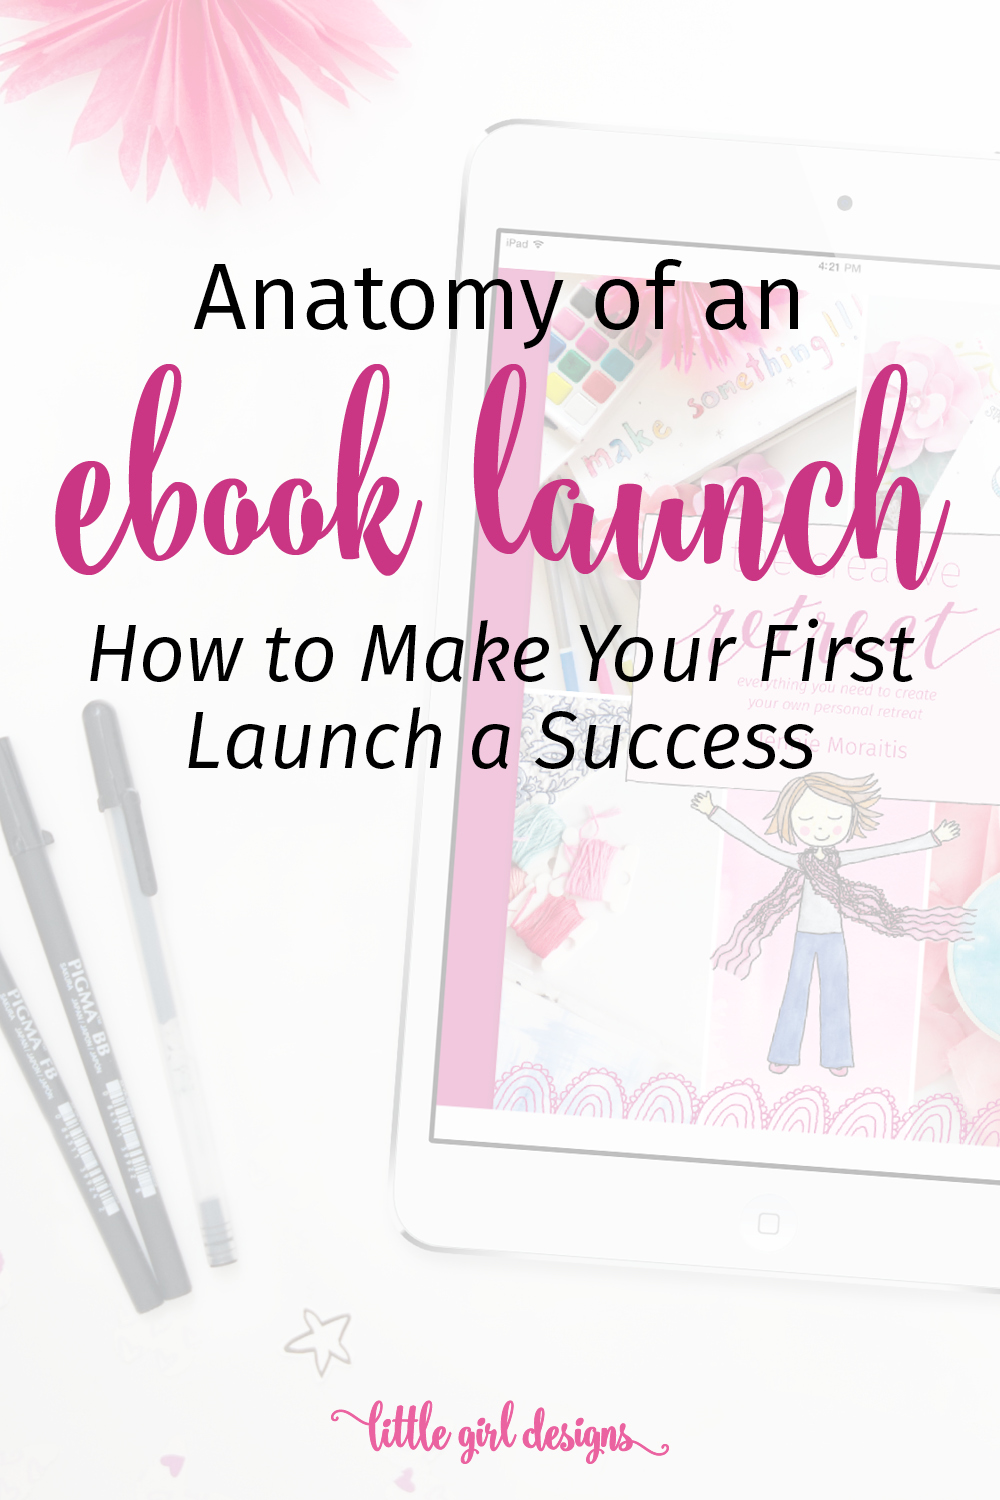 Anatomy of an eBook Launch